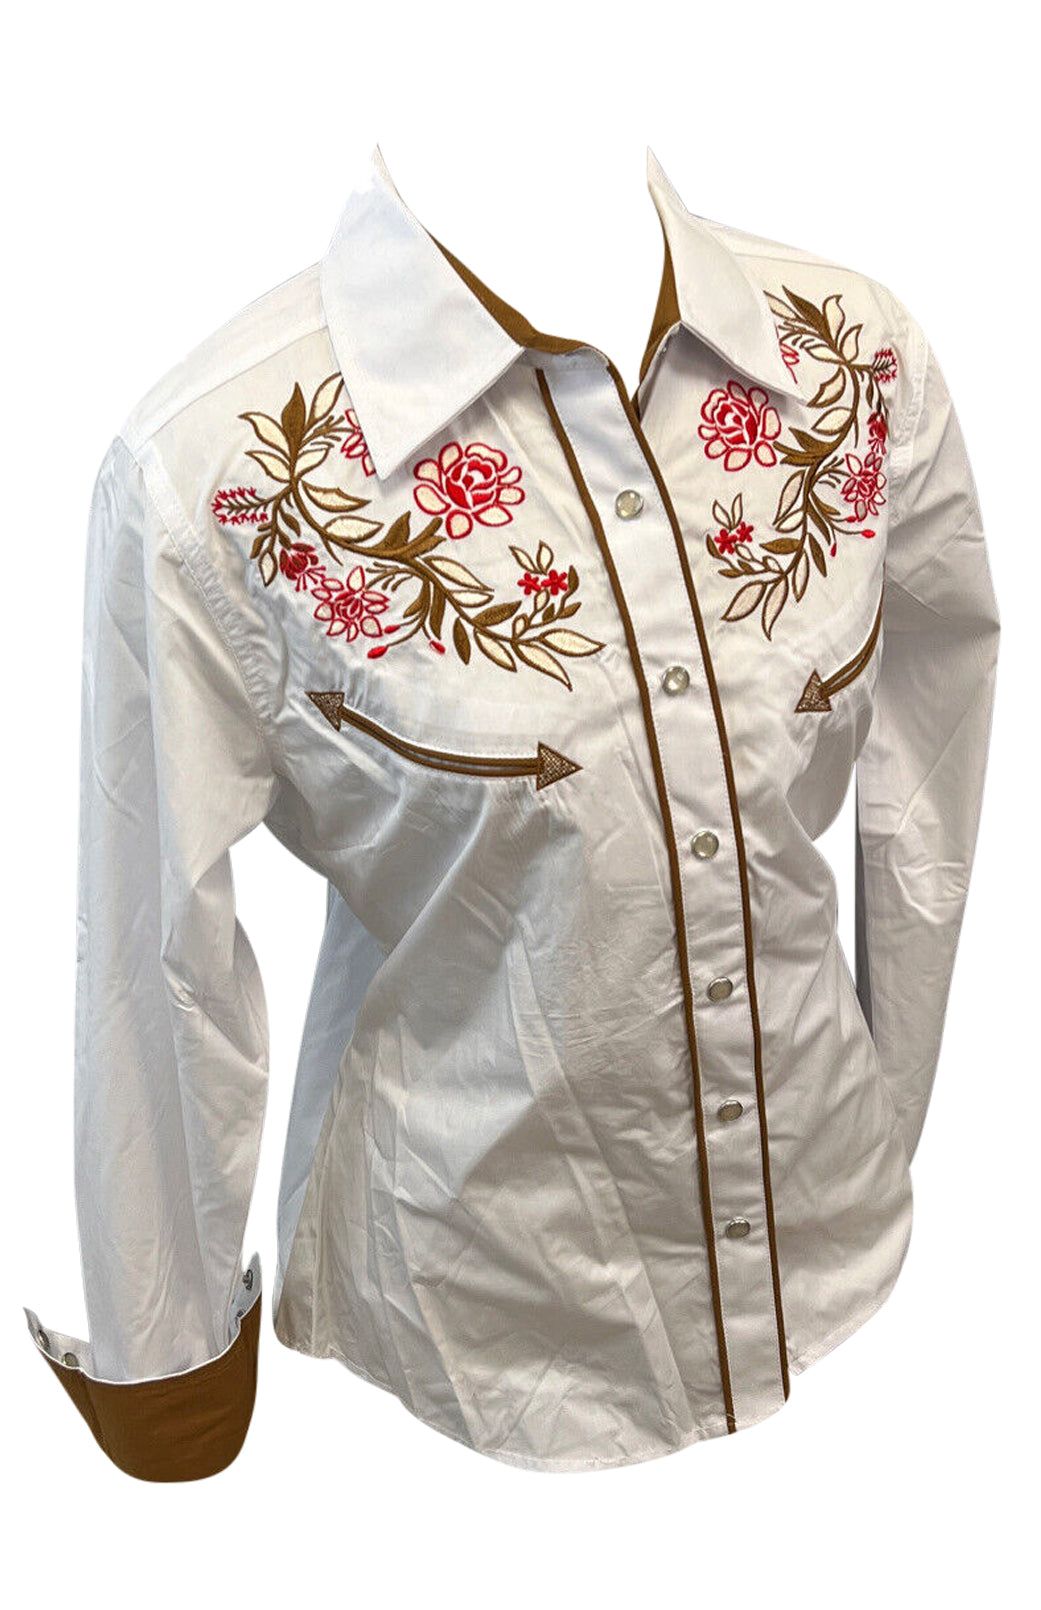 LADIES BUCKEROO SHIRTS: WHITE RED FLORAL STITCH PEARL SNAP